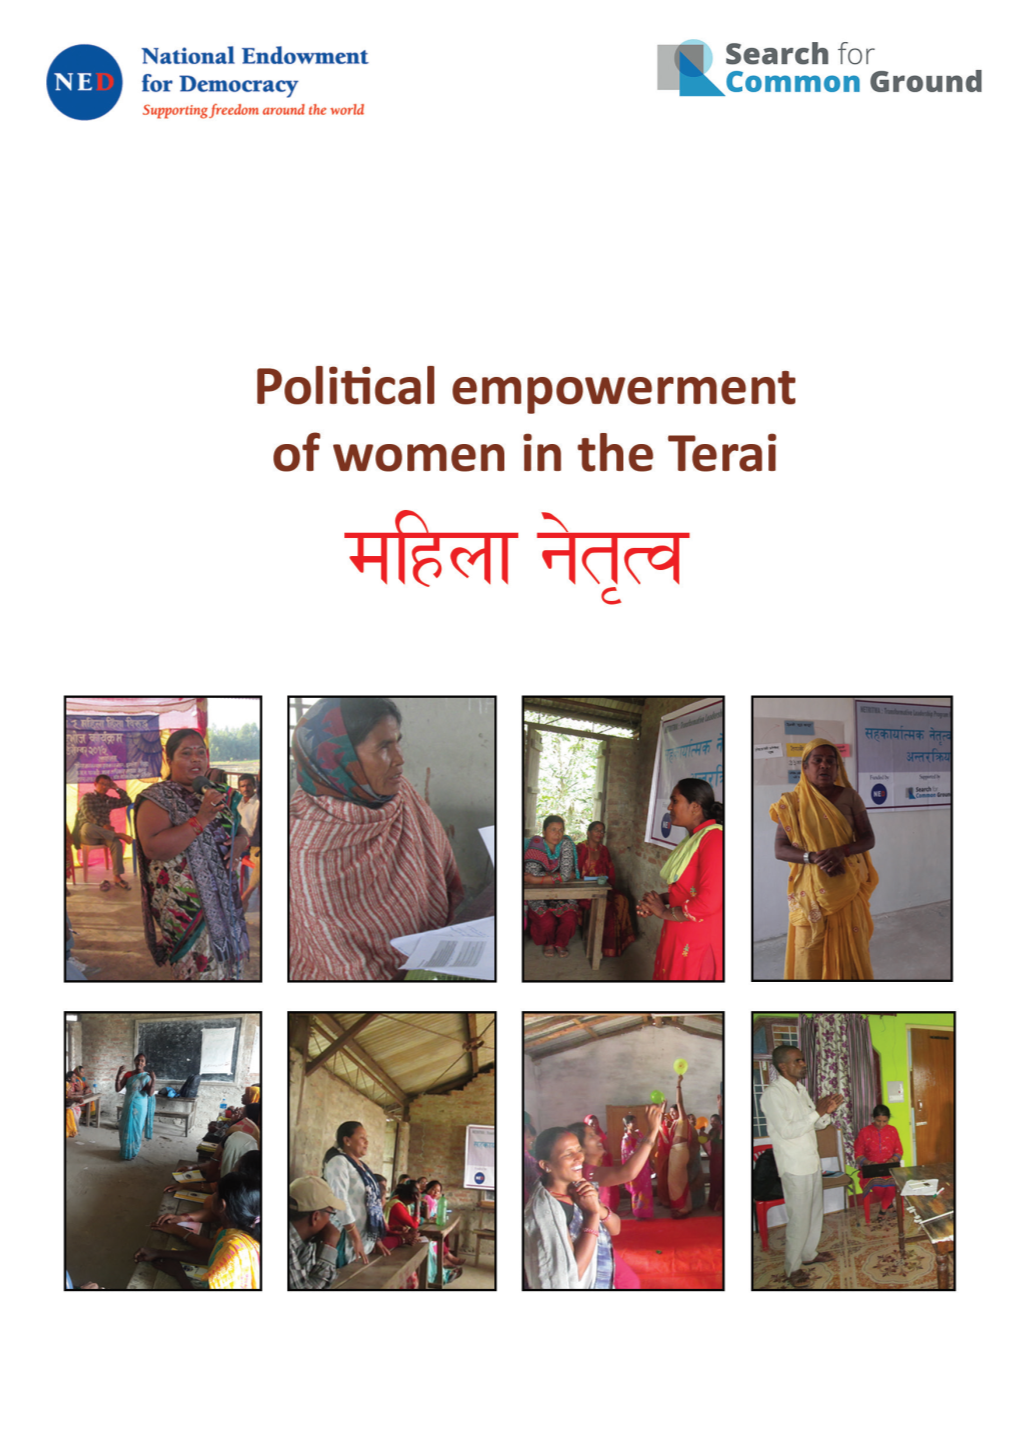 Netritwa”, Was a One-Year Pilot Project Funded by the National Endowment for Democracy (NED) Imple- Mented in Siraha District from April 2016 to March 2017